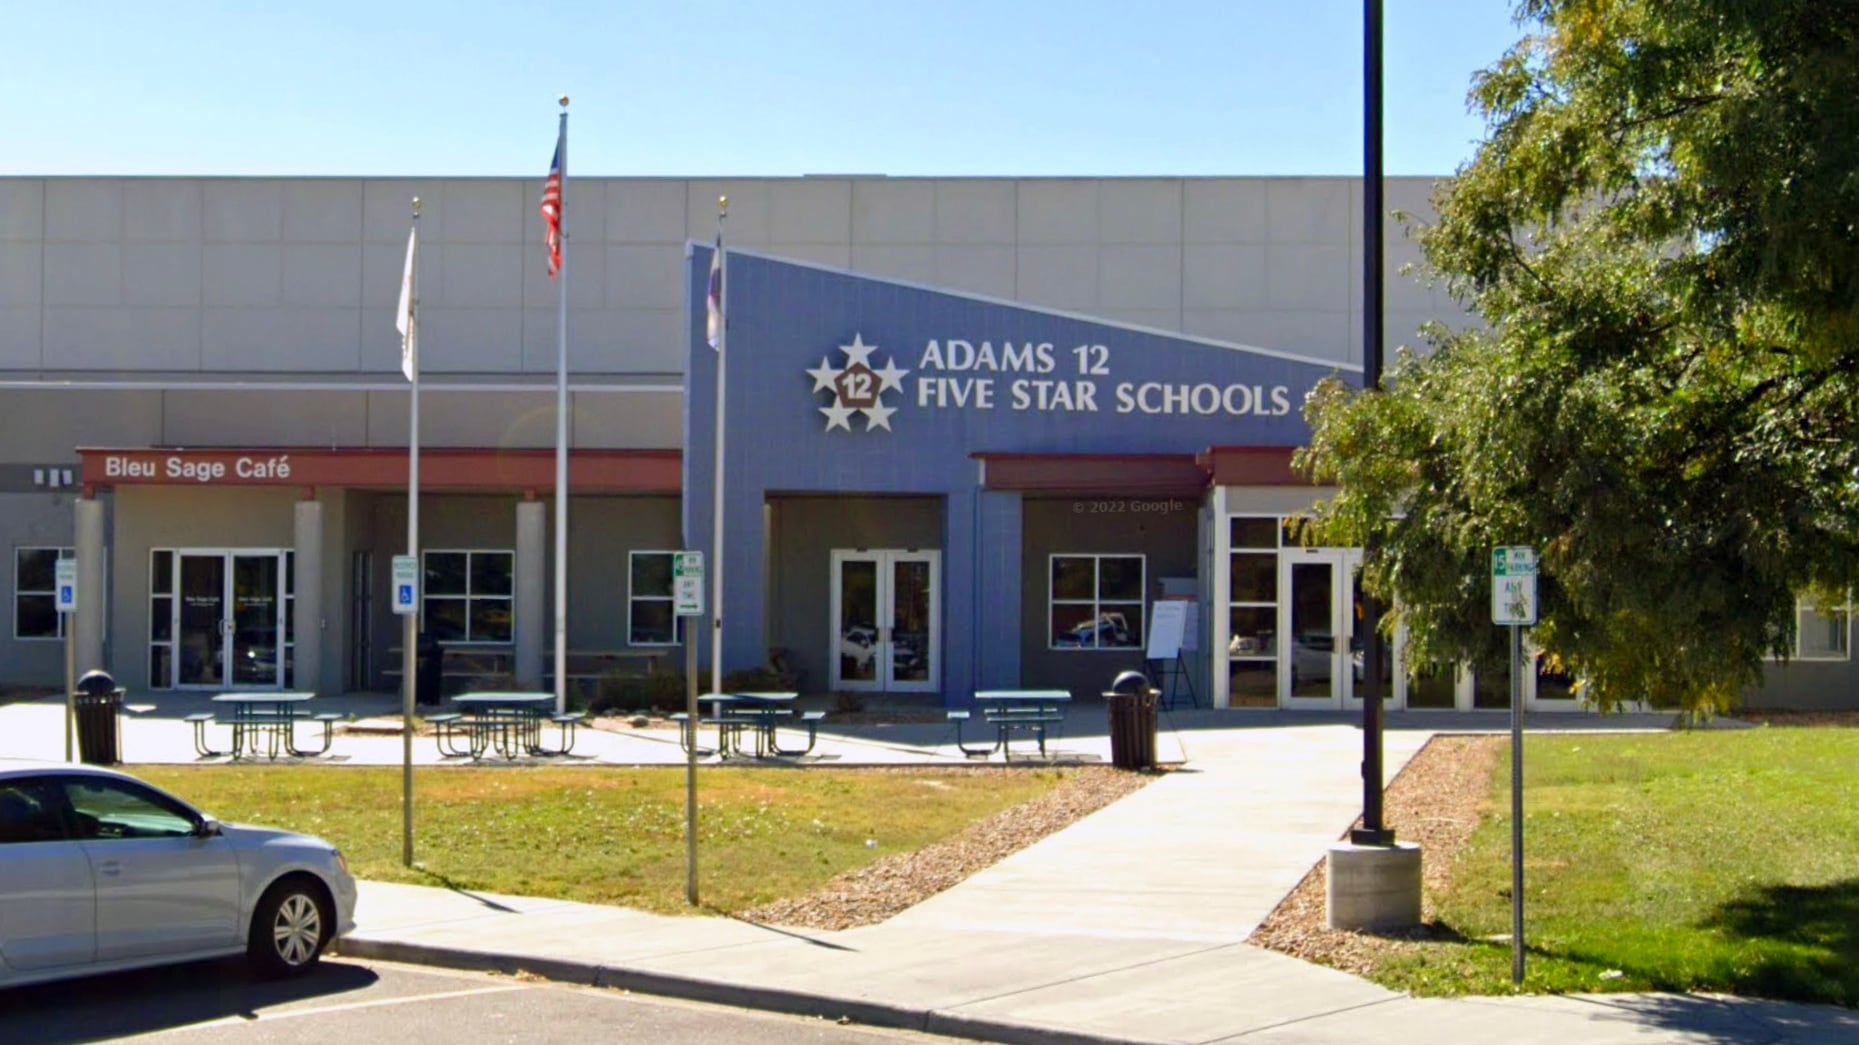 Photo shows Adams 12 Five Star Schools district offices in Thornton. The blue entryway has a sharp angle with a large sign with the district name.